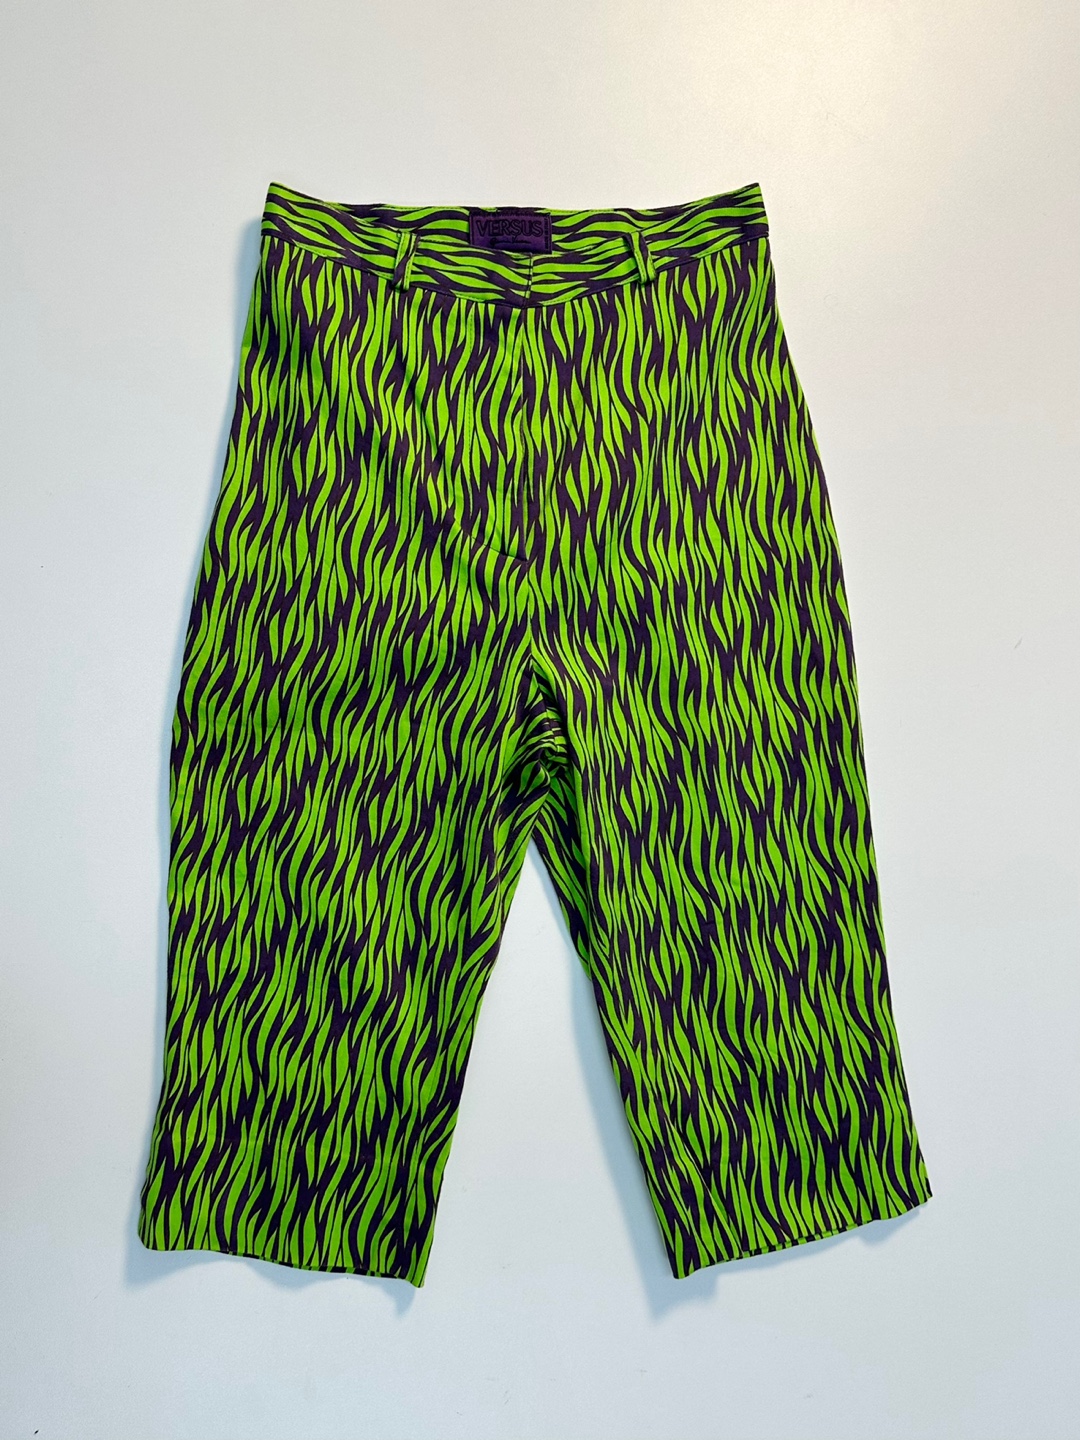 Versus(Versace) Green Purple Animal Pattern Part 5 Shorts Pants (made in italy) [24 inch]